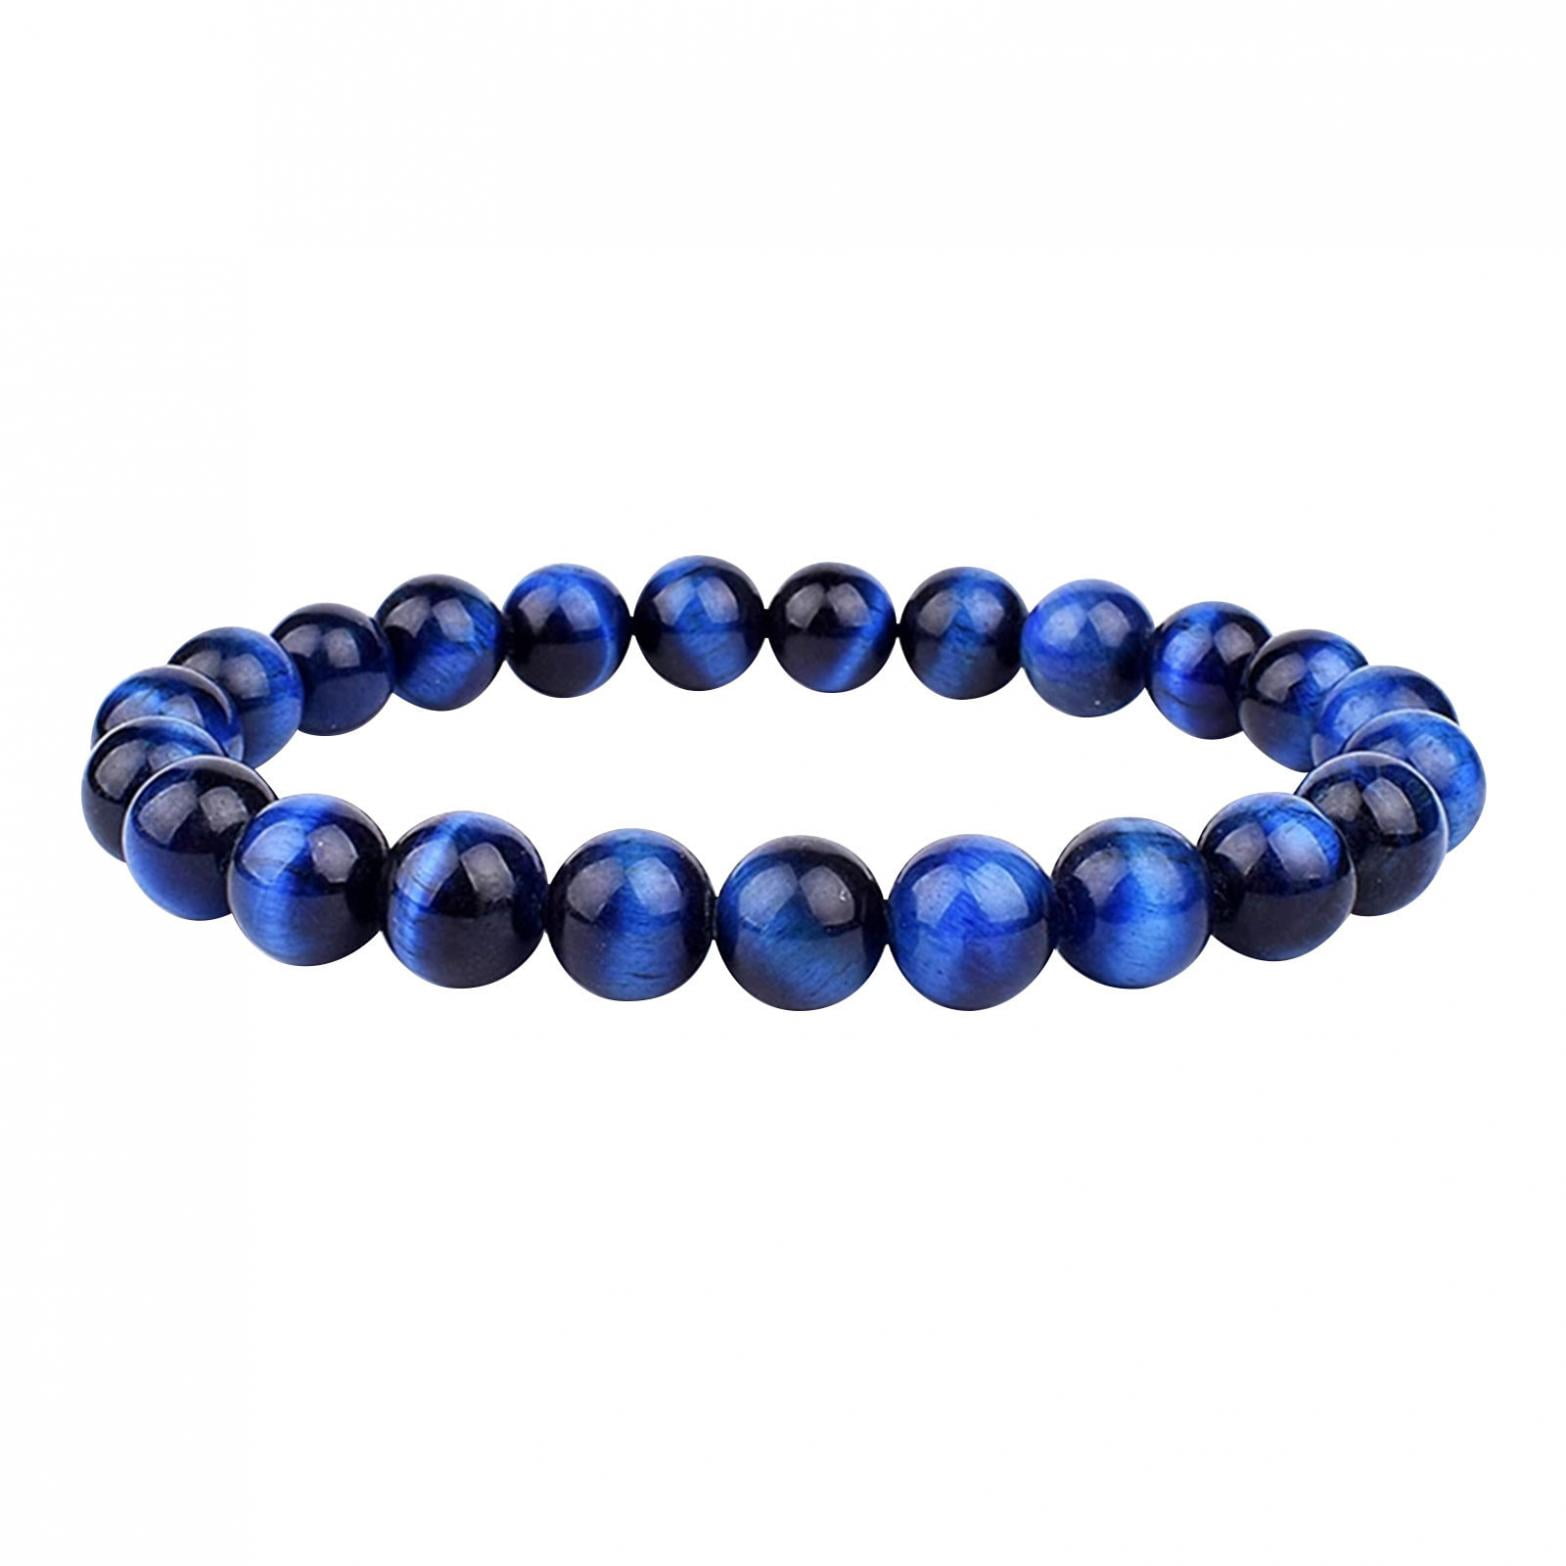 7 Chakra Bracelet With Blue And Purple Scrubs And Laugh Chakra Bead Bracelet  For Men And Women Healing Gemstone For Yoga And Meditation From Hcy1227,  $22.51 | DHgate.Com